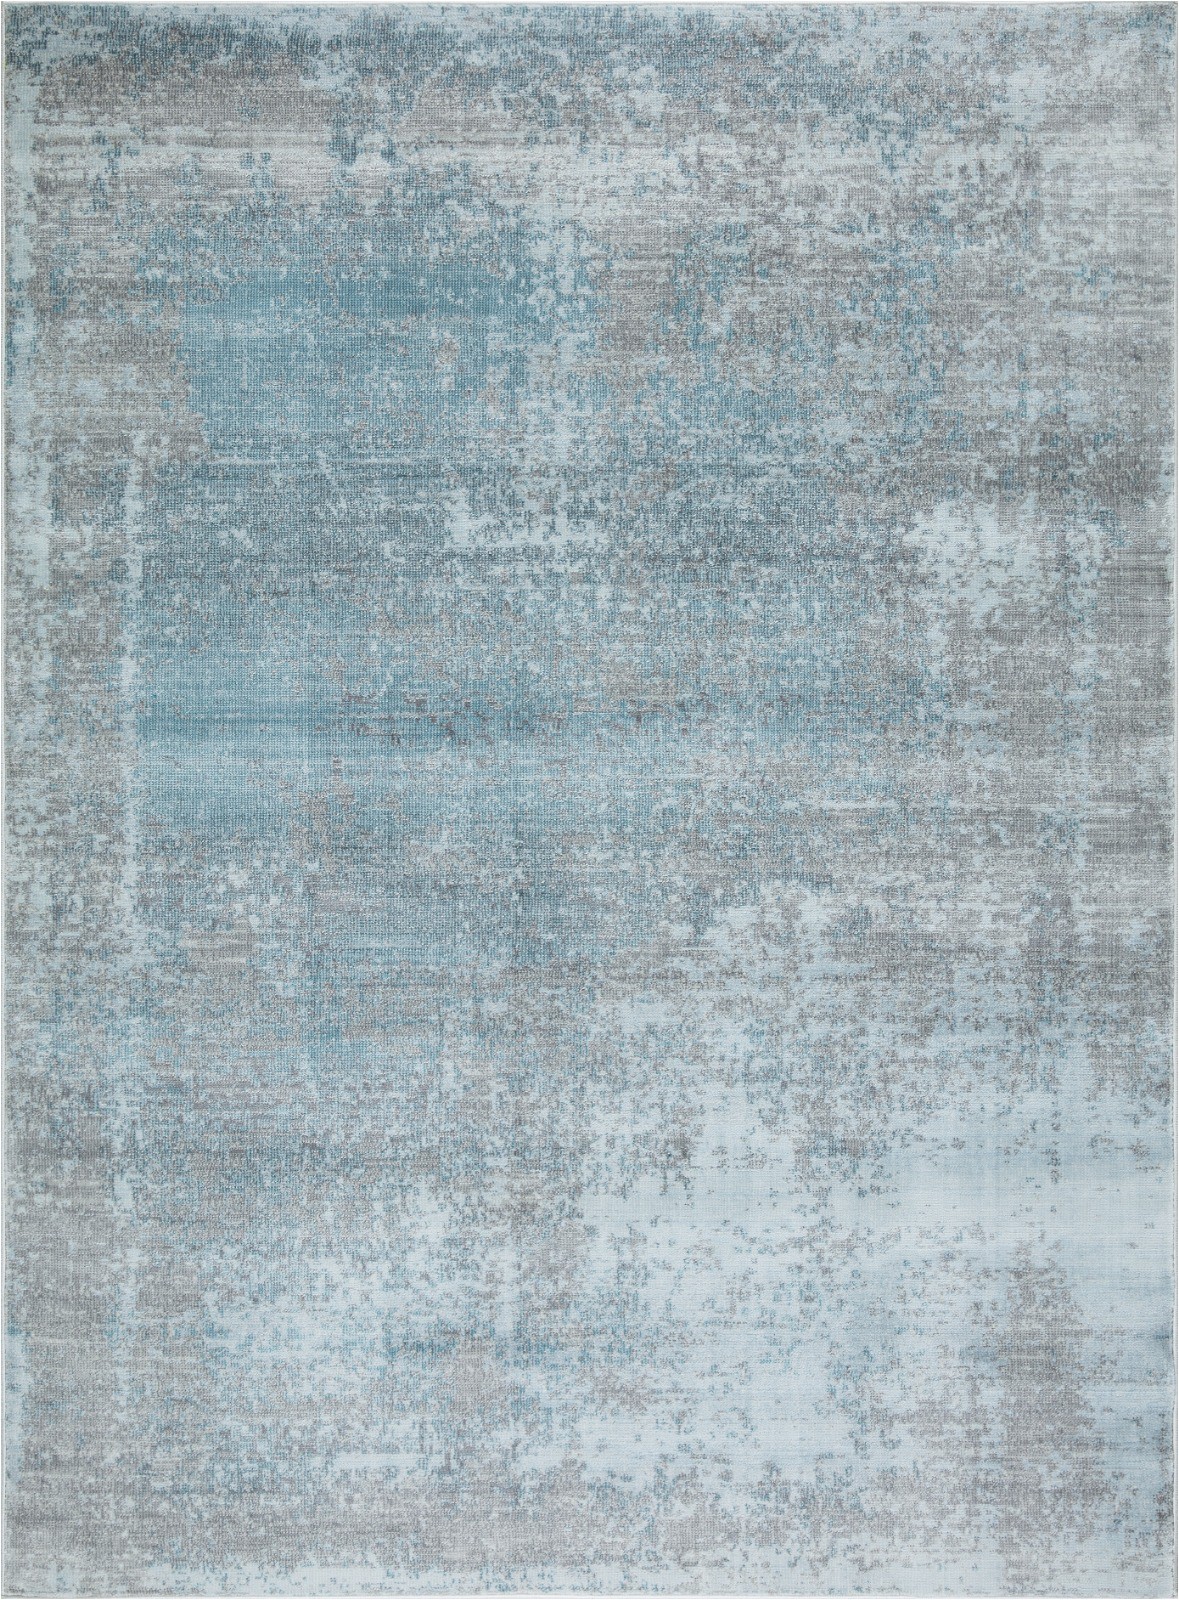 Plush Blue area Rug Mod Arte Mirage Collection area Rug Modern & Contemporary Style Abstract soft & Plush Blue Gray